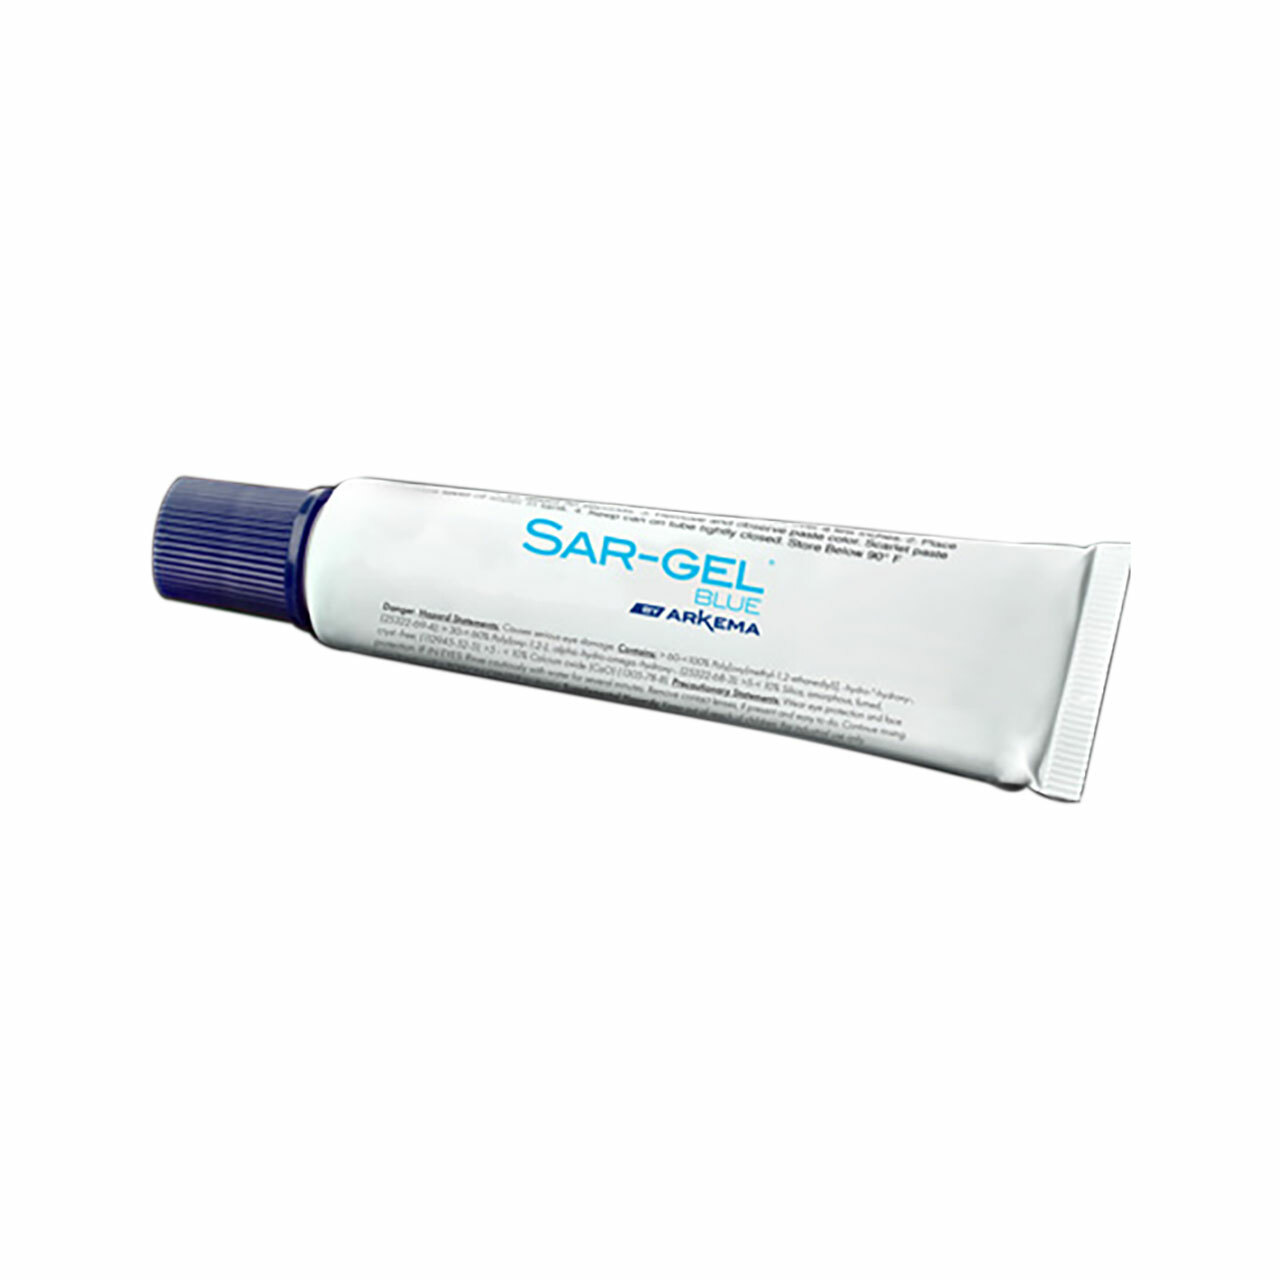 SAR-GEL BLUE Water Finding Paste, 1oz Tube - FAST SHIPPING